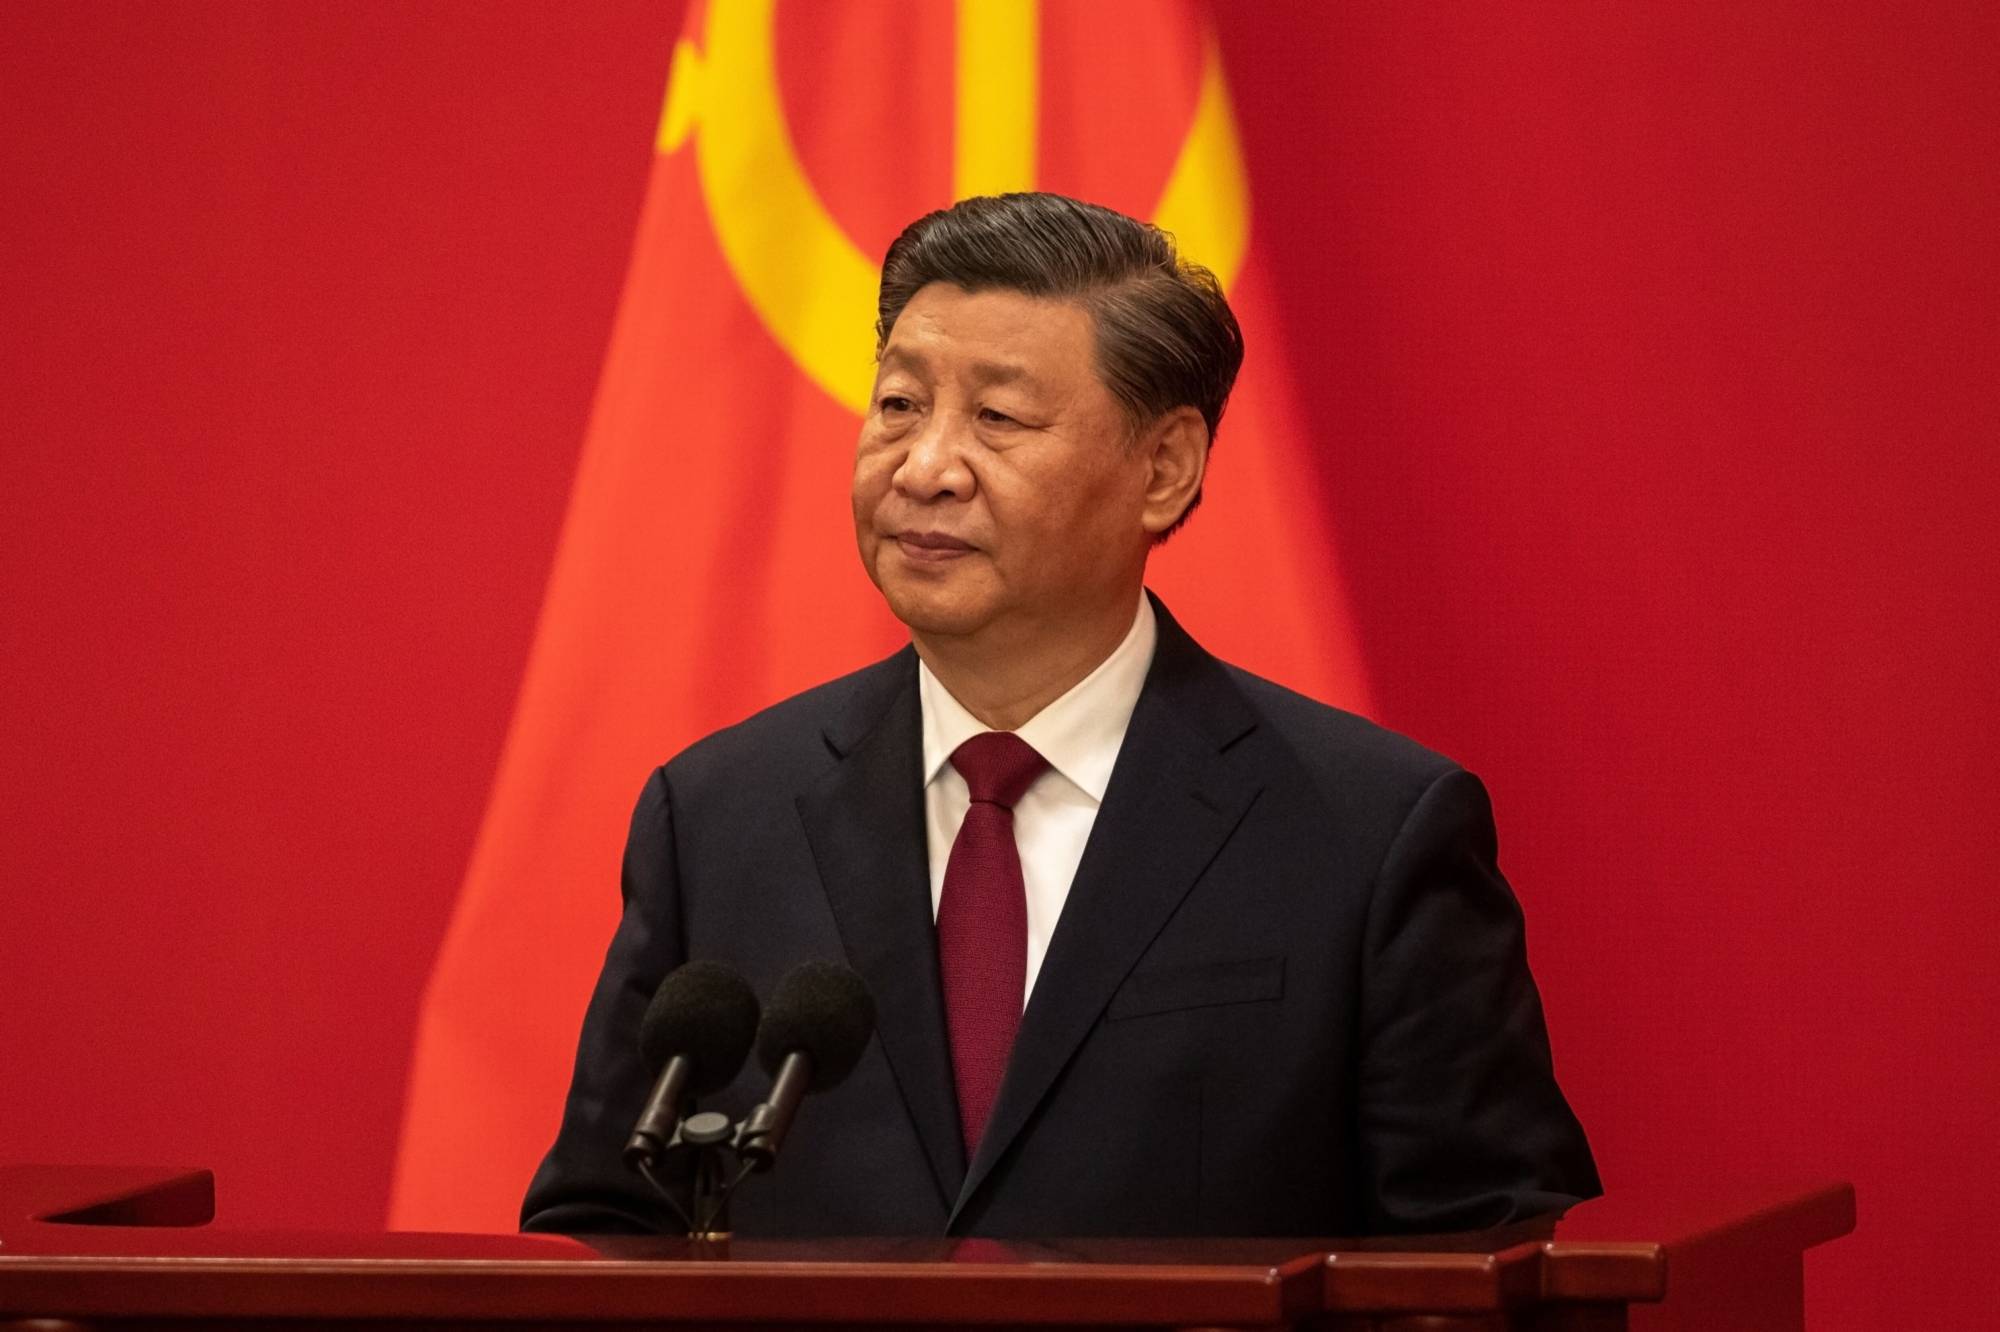 Chinese President Xi Jinping's government has been busy striking deals over the past year to expand the ways in which the yuan is used, with new agreements linked to the currency stretching from Russia and Saudi Arabia to Brazil and even France. | BLOOMBERG